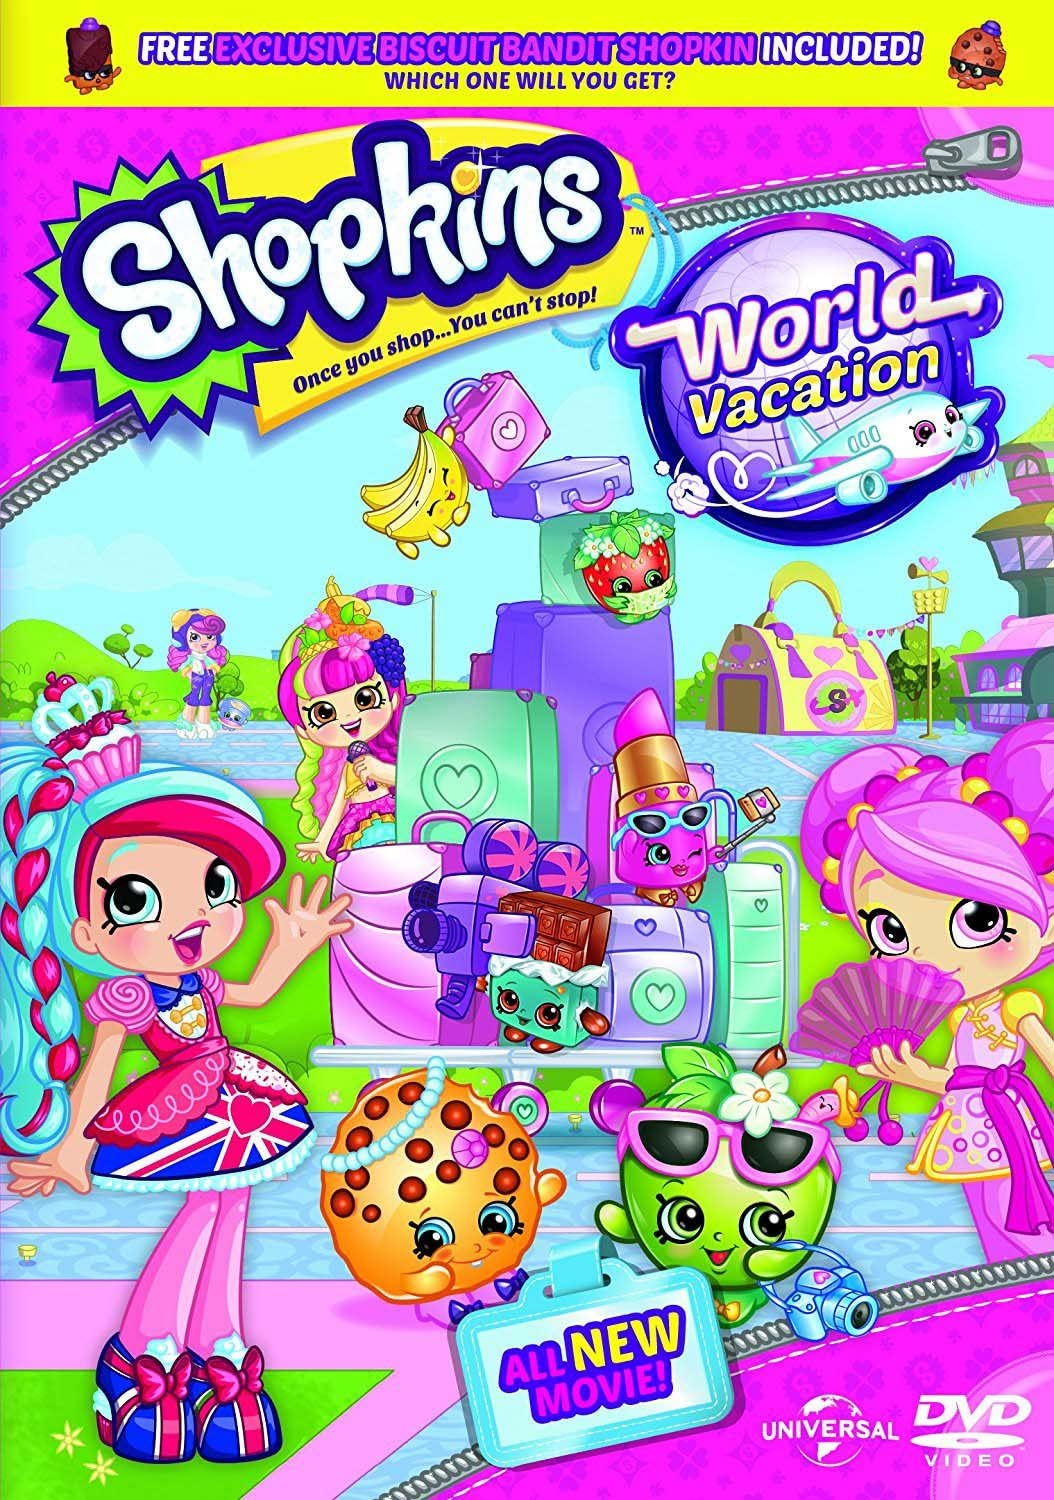 Shopkins - World Vacation (includes exclusive Shopkin figure) - Animation [DVD]